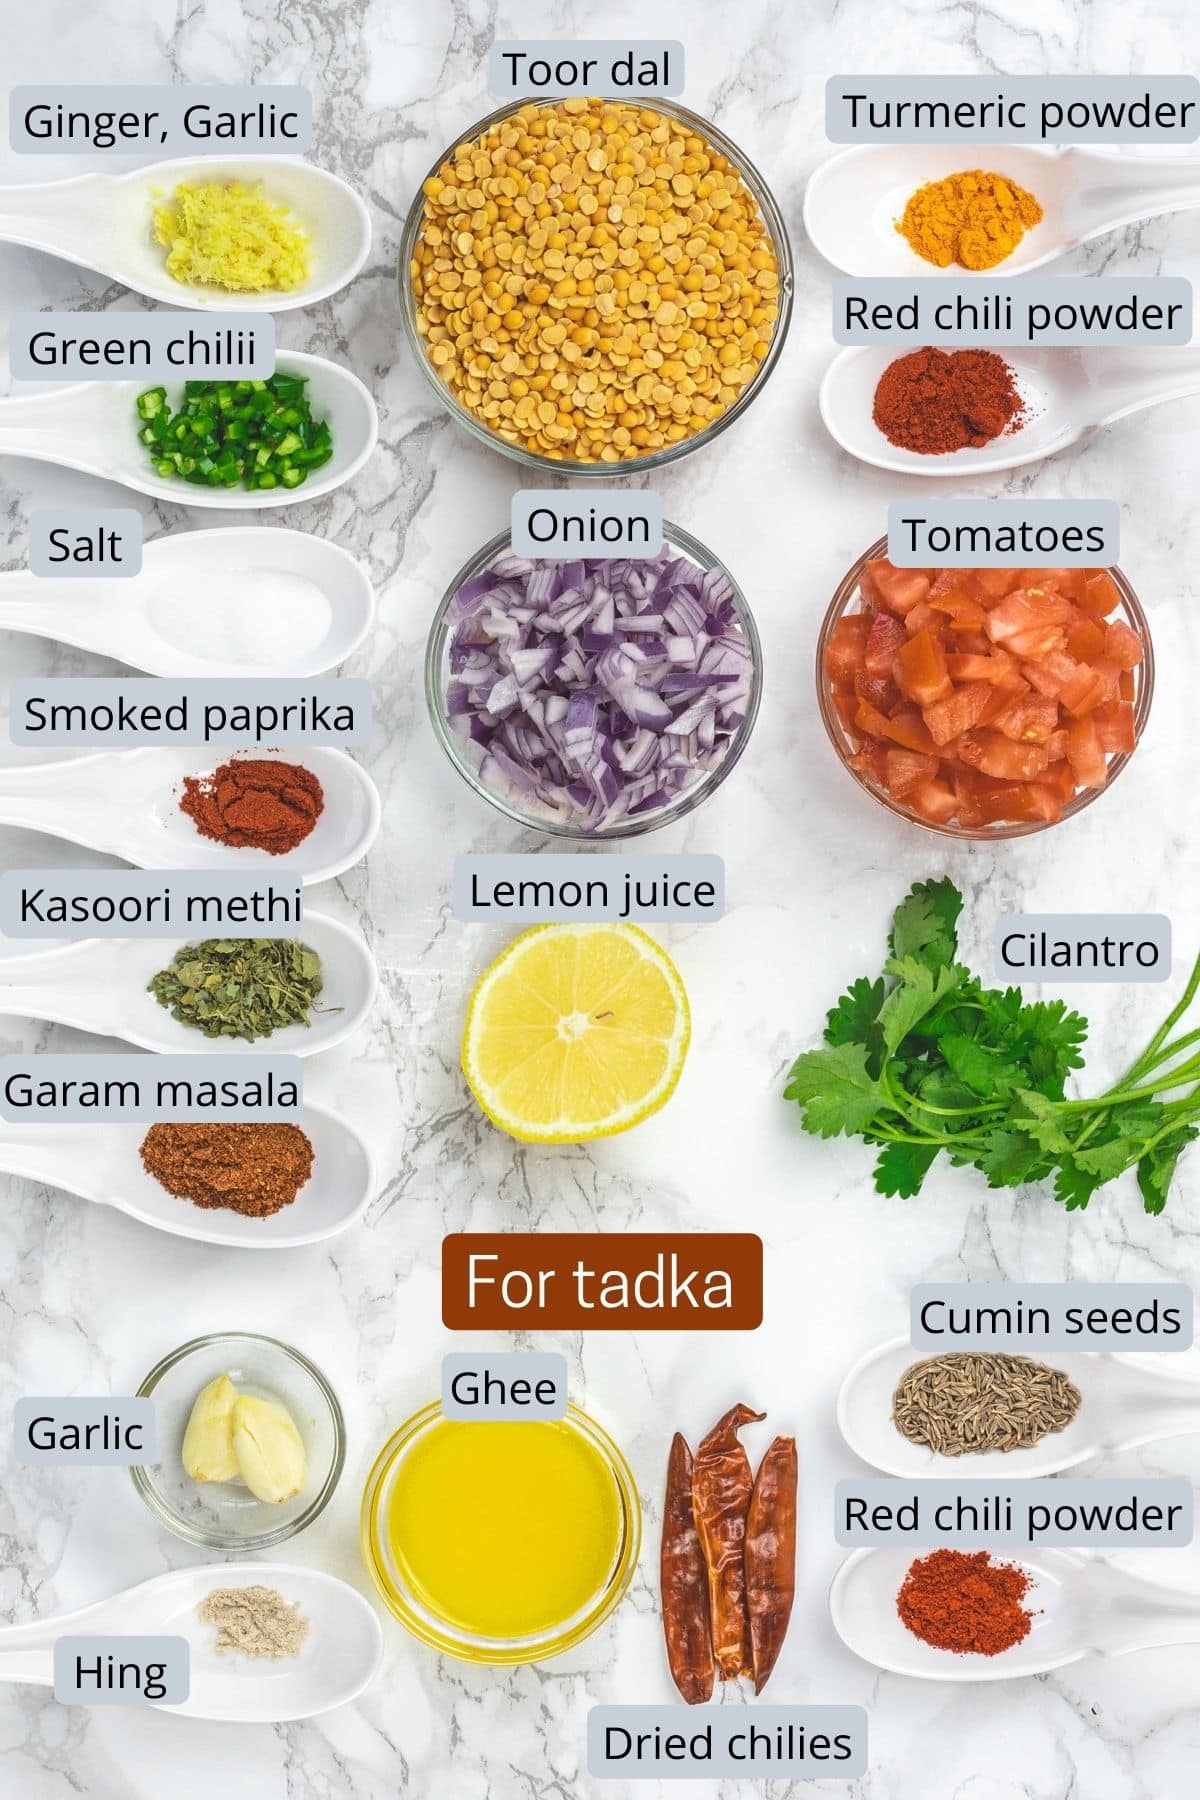 Dal tadka ingredients with labels on a marble surface.